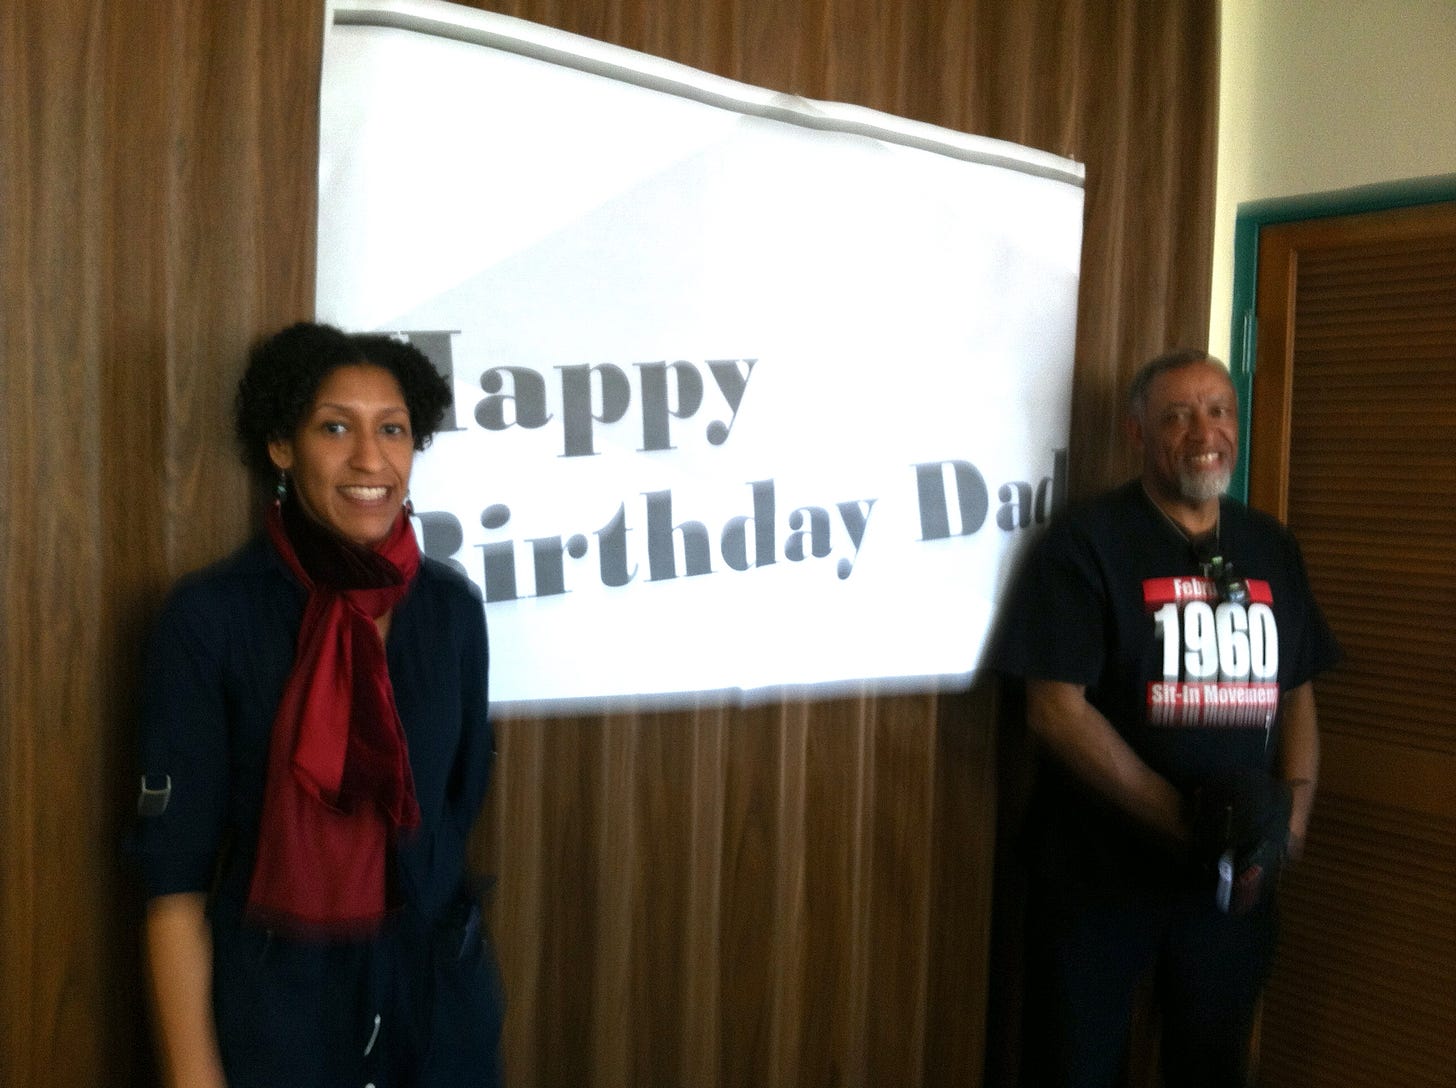 Kristen and her dad are standing on two sides of a white banner. The banner says Happy Birthday Dad!